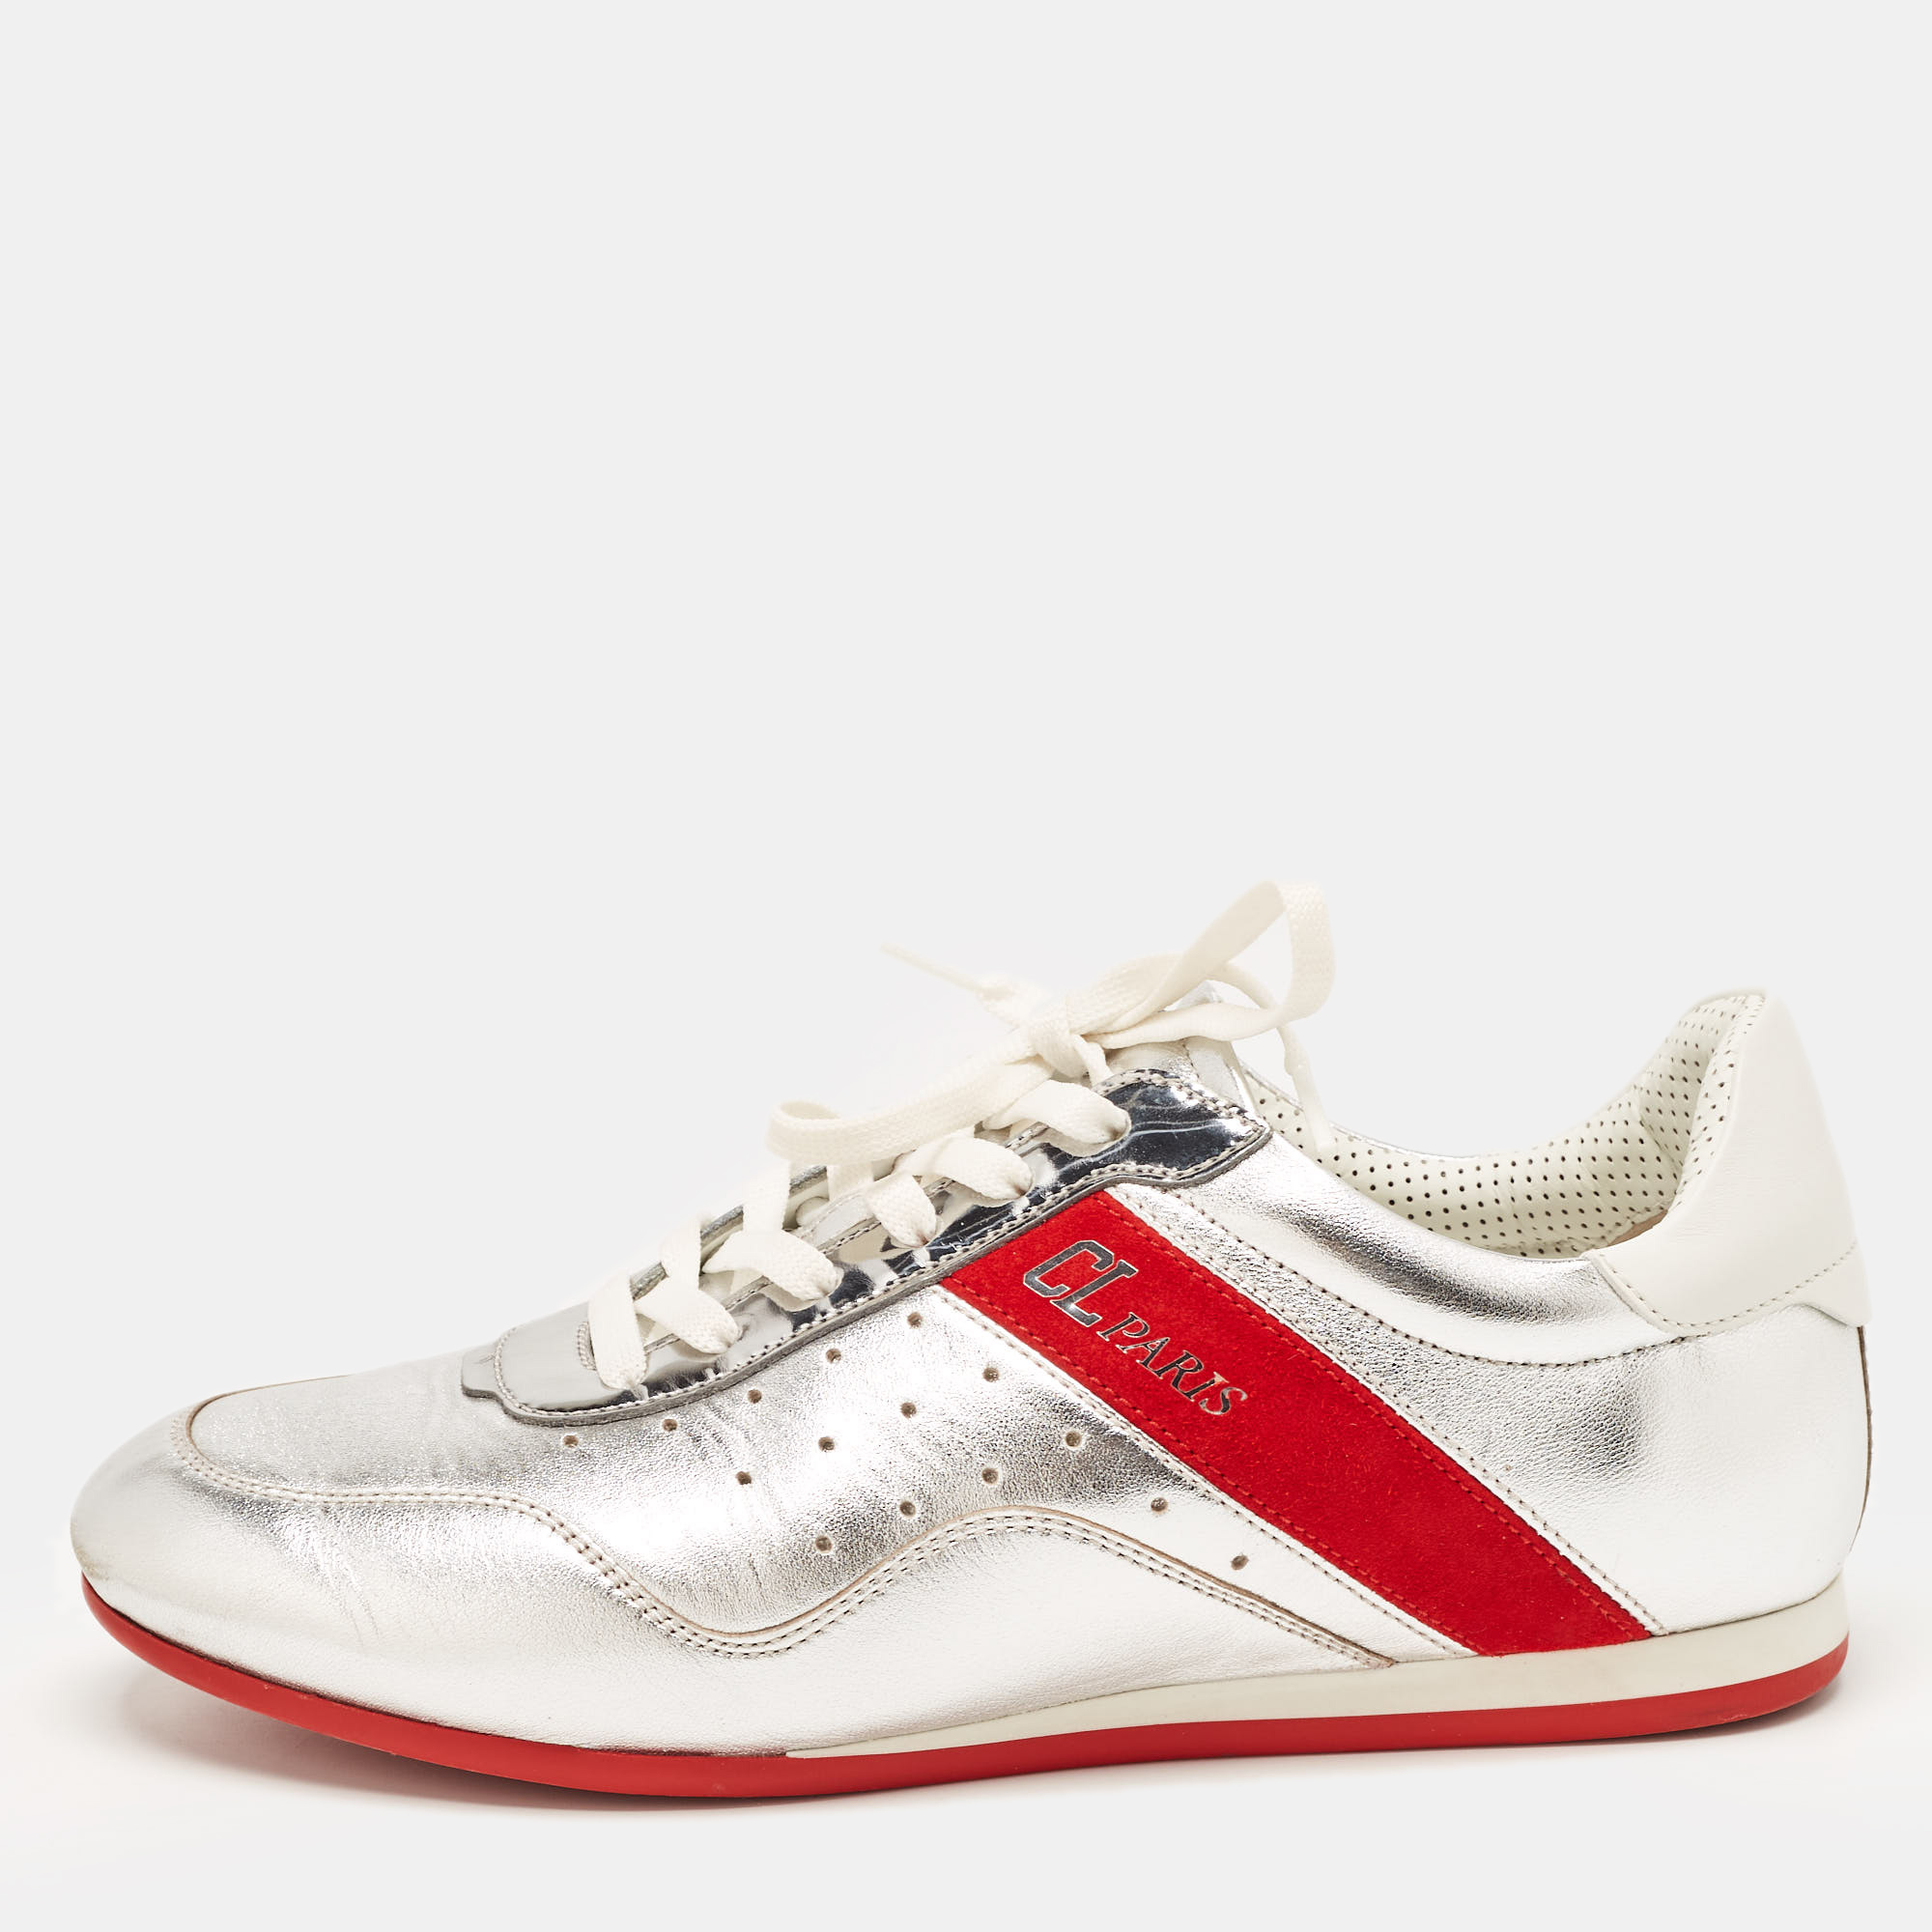 Christian Louboutin Silver/Red Leather And Suede My K Low Sneakers Size 36.5